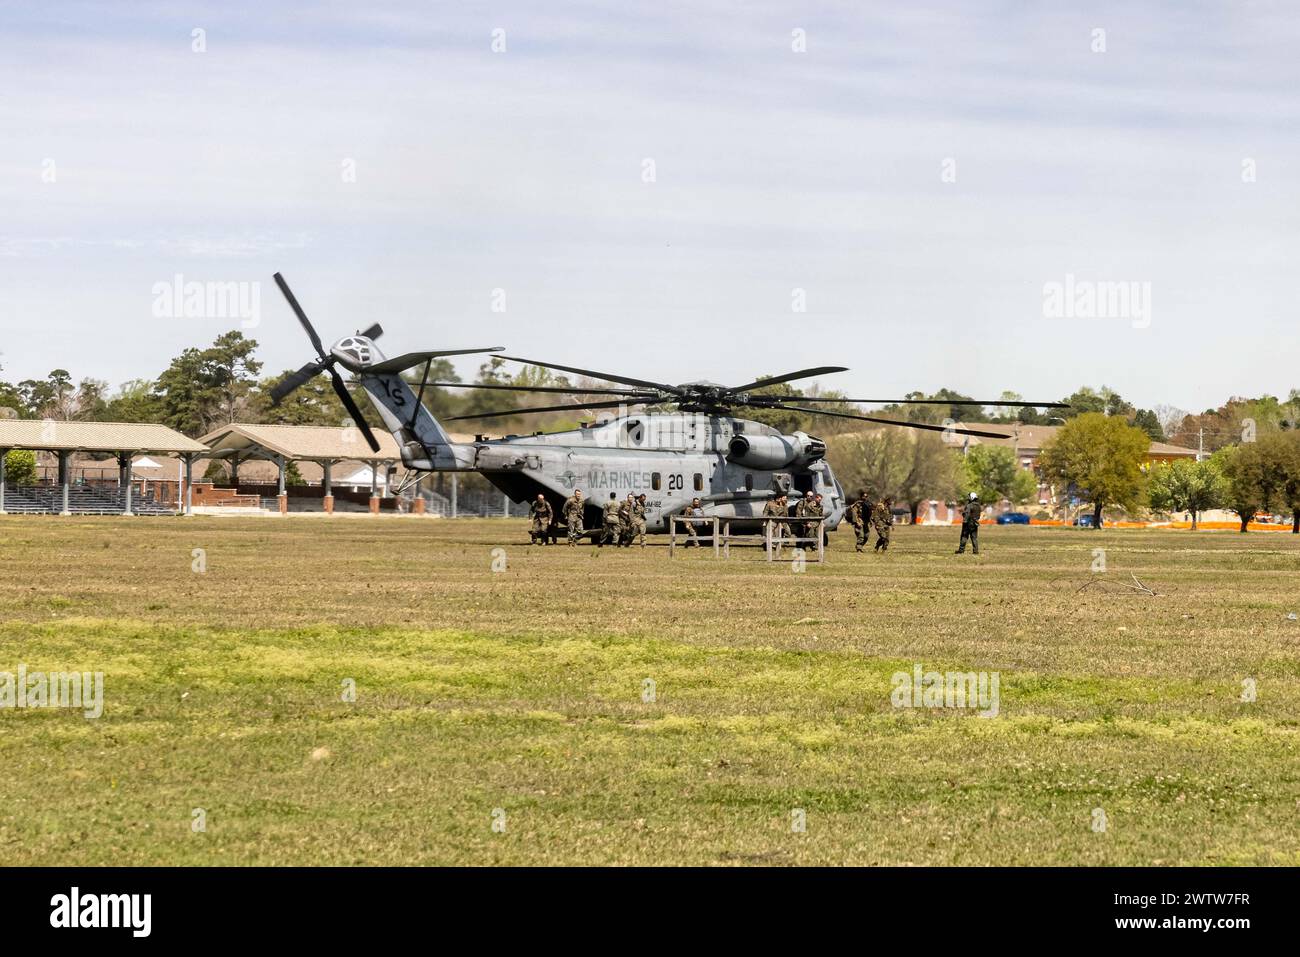 U.S. Marines with the 26th Marine Expeditionary Unit (Special Operations Capable) (MEU(SOC))’s command element unload from a CH-53E Super Stallion after arriving at Camp Lejeune, North Carolina, Mar. 18, 2024. Marines and Sailors assigned to the 26th MEU(SOC) returned home after completing an eight-month deployment embarked aboard the Bataan Amphibious Ready Group (BAT ARG). During its deployment, the BAT ARG and 26th MEU(SOC) team participated in a wide array of exercises with NATO Allies and regional partners spanning across the Tri-Geographic Combatant Command to enhance interoperability, M Stock Photo